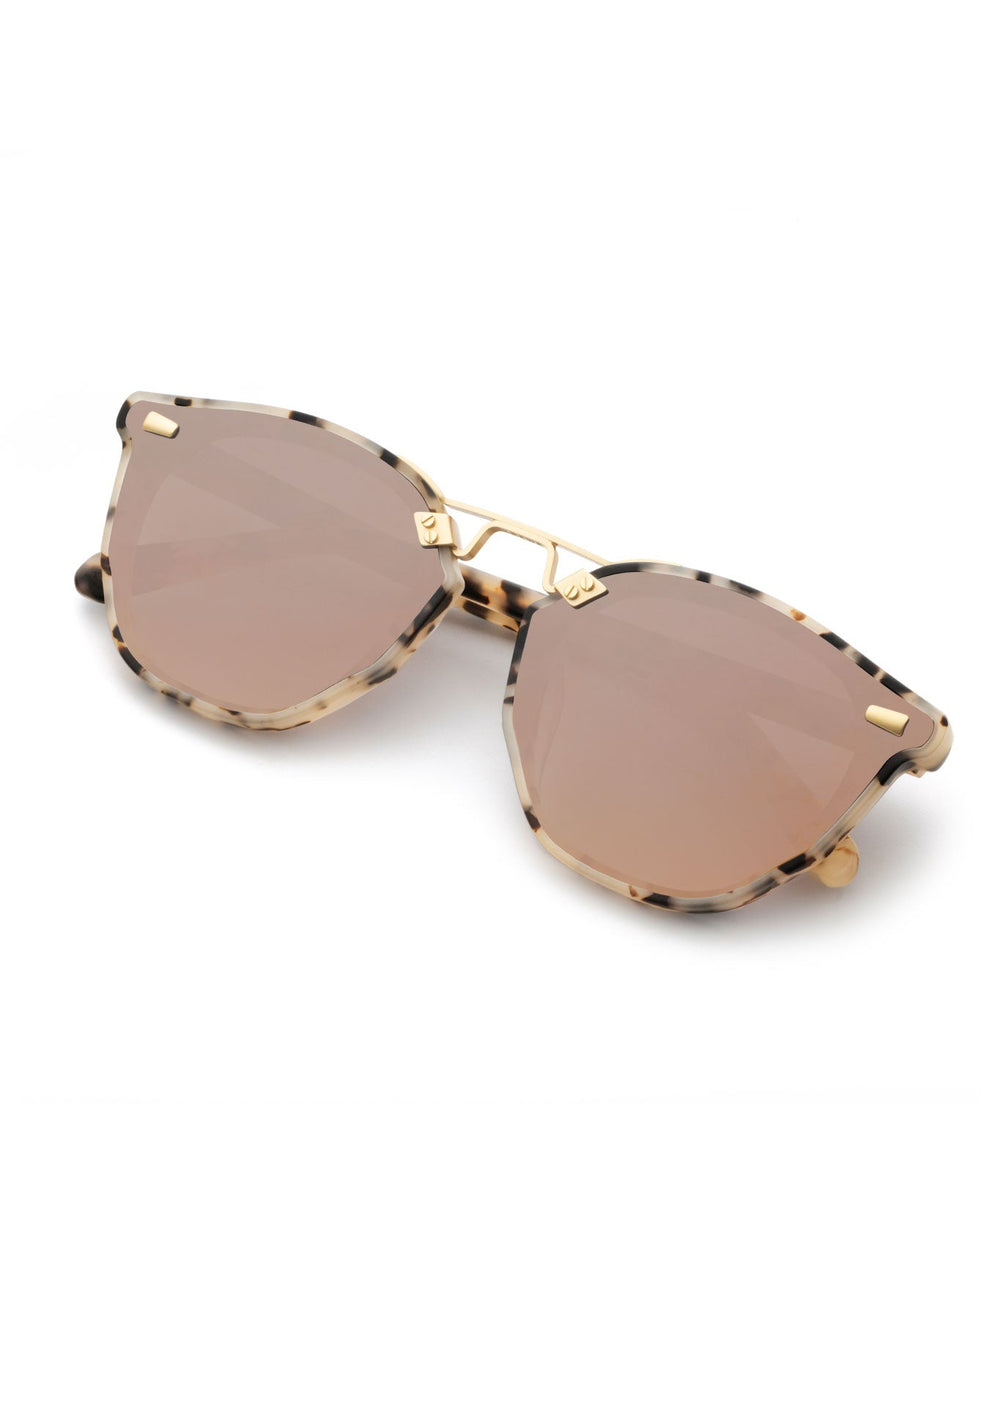 KREWE - BEAU NYLON | Matte Oyster 18K Mirrored handcrafted, luxury tortoise shell sunglasses with a double metal bridge